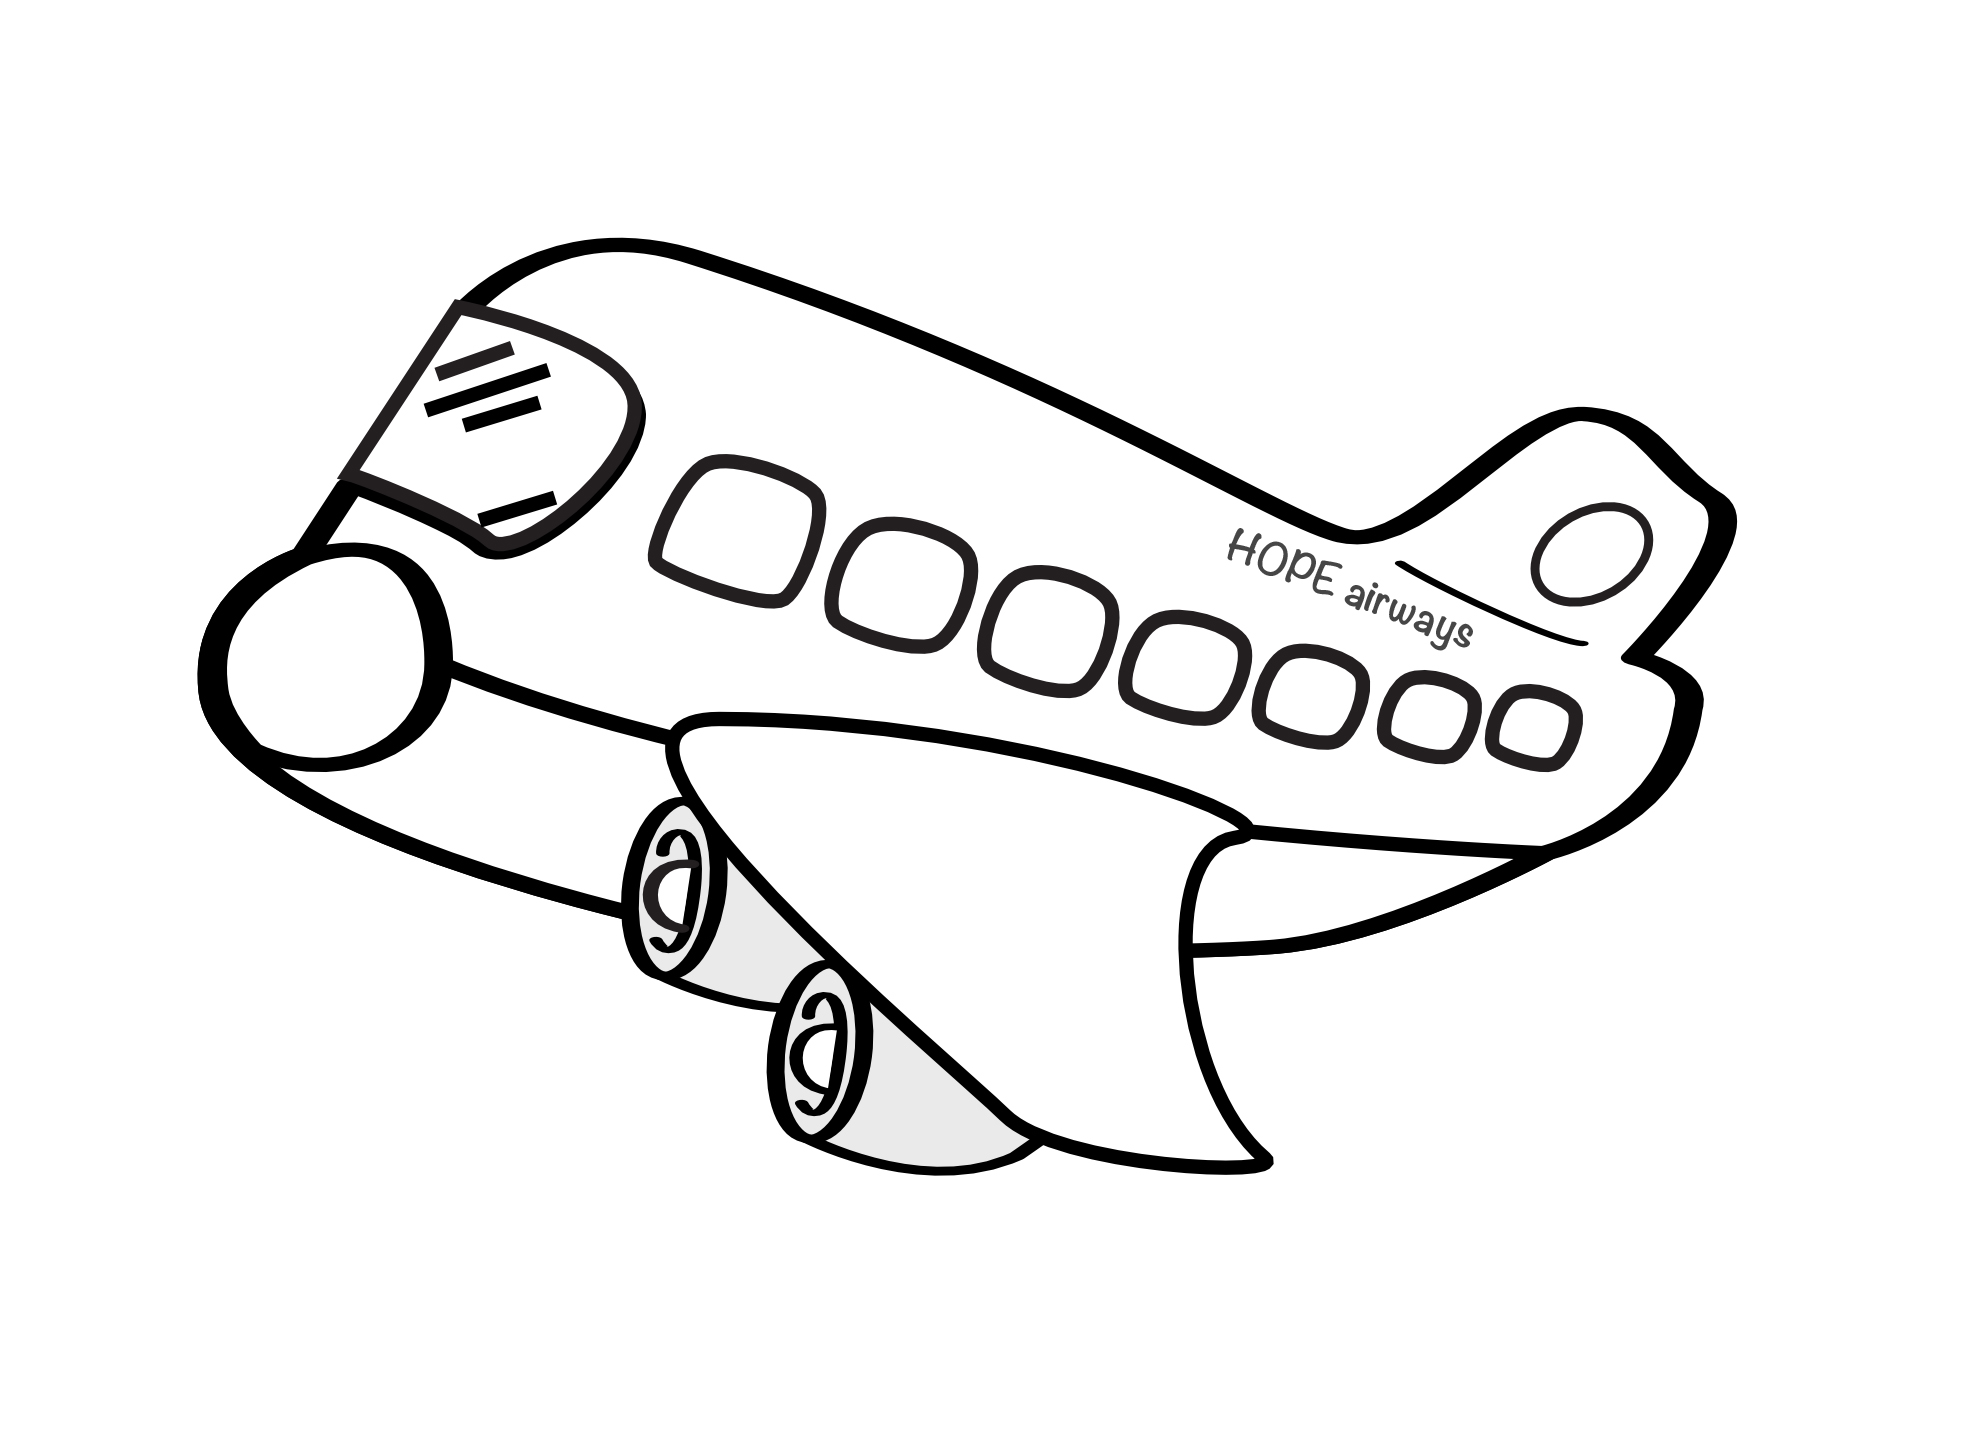 Free Airplane Drawing Pictures, Download Free Airplane Drawing Pictures ...